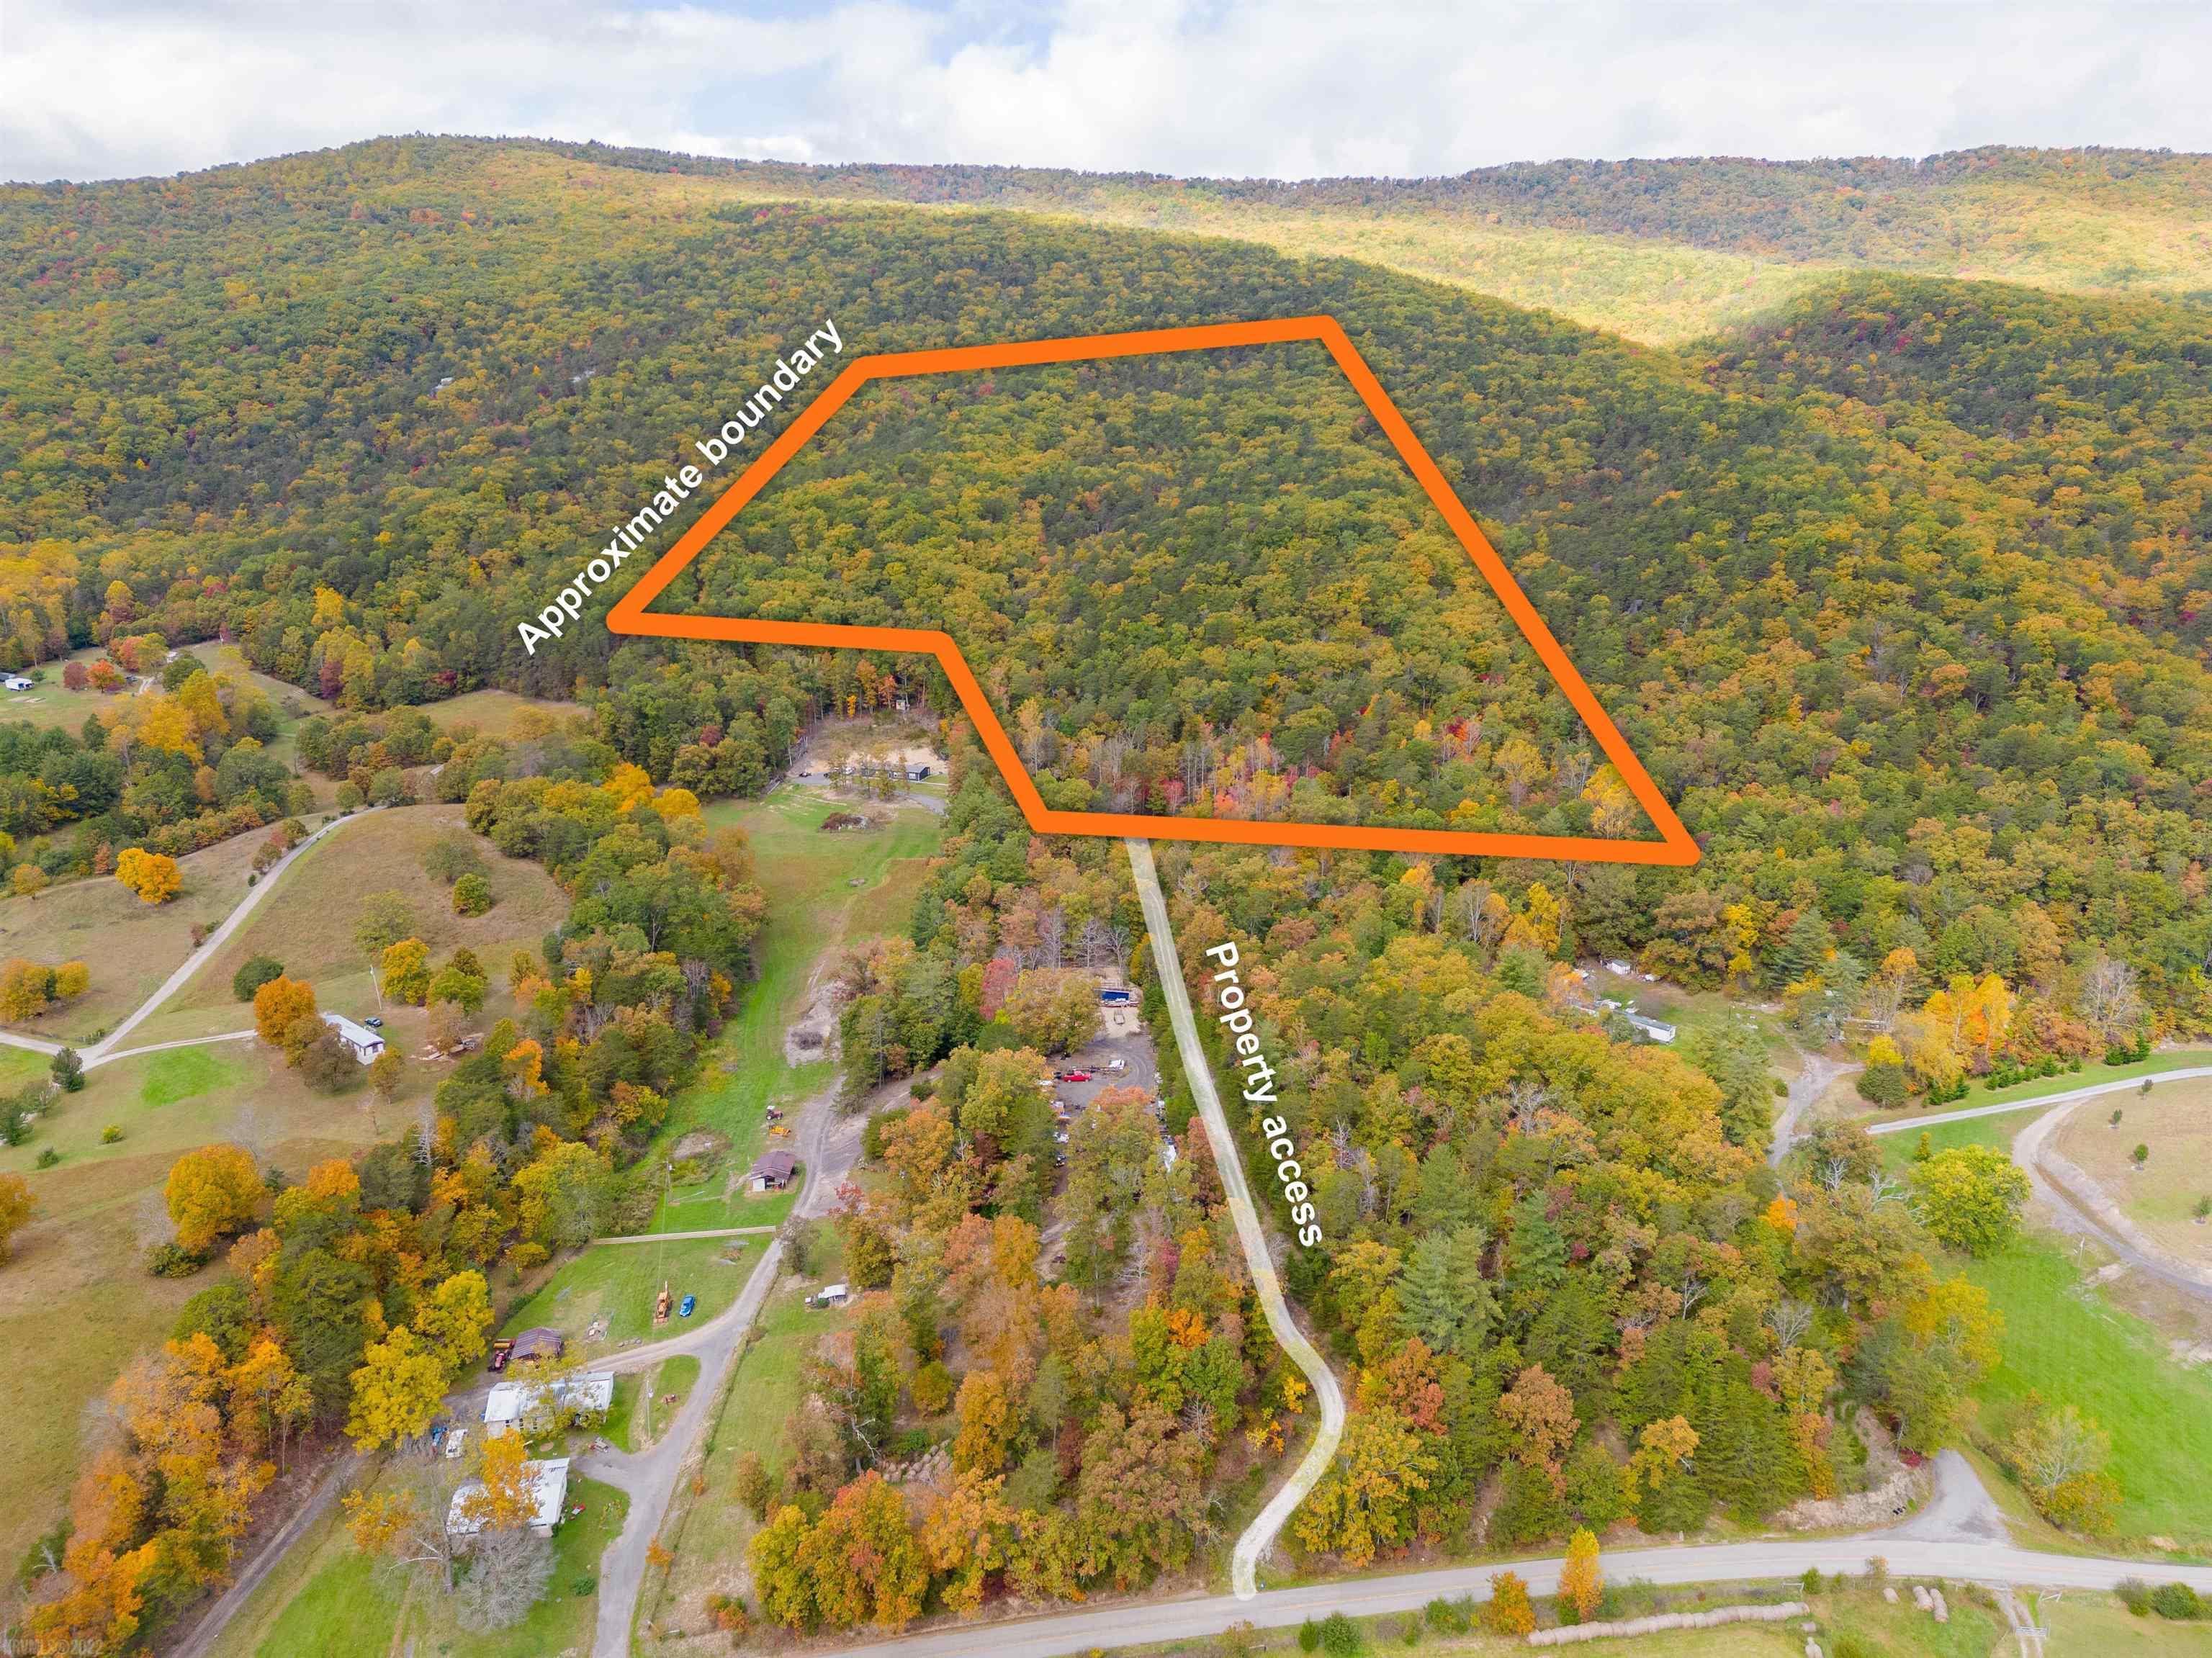 Looking for a private place to build, play or hunt. This property has tons of potential. There is already a good deeded right of way into the property. The property sits close to the Ironto exit on I 81 making it easy to get to both the Roanoke and New River Valleys.